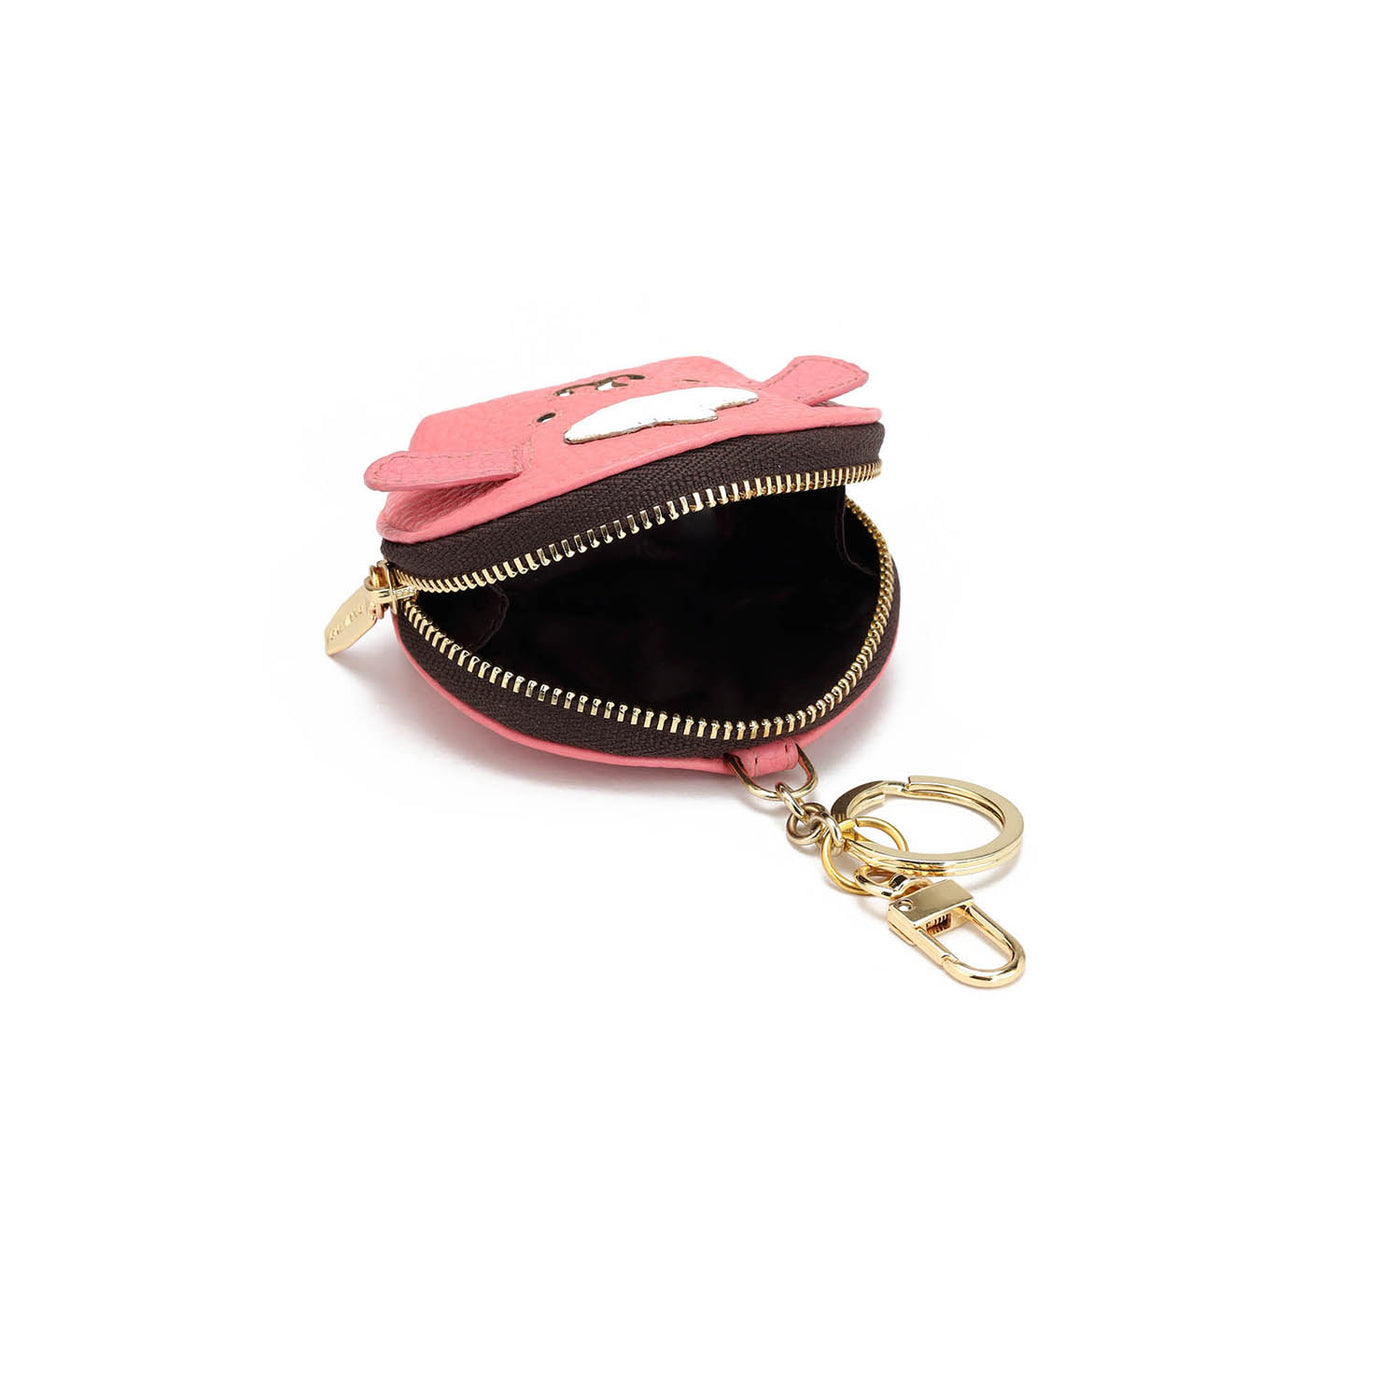 Wax Leather Bag Hanging - Hyper Pink